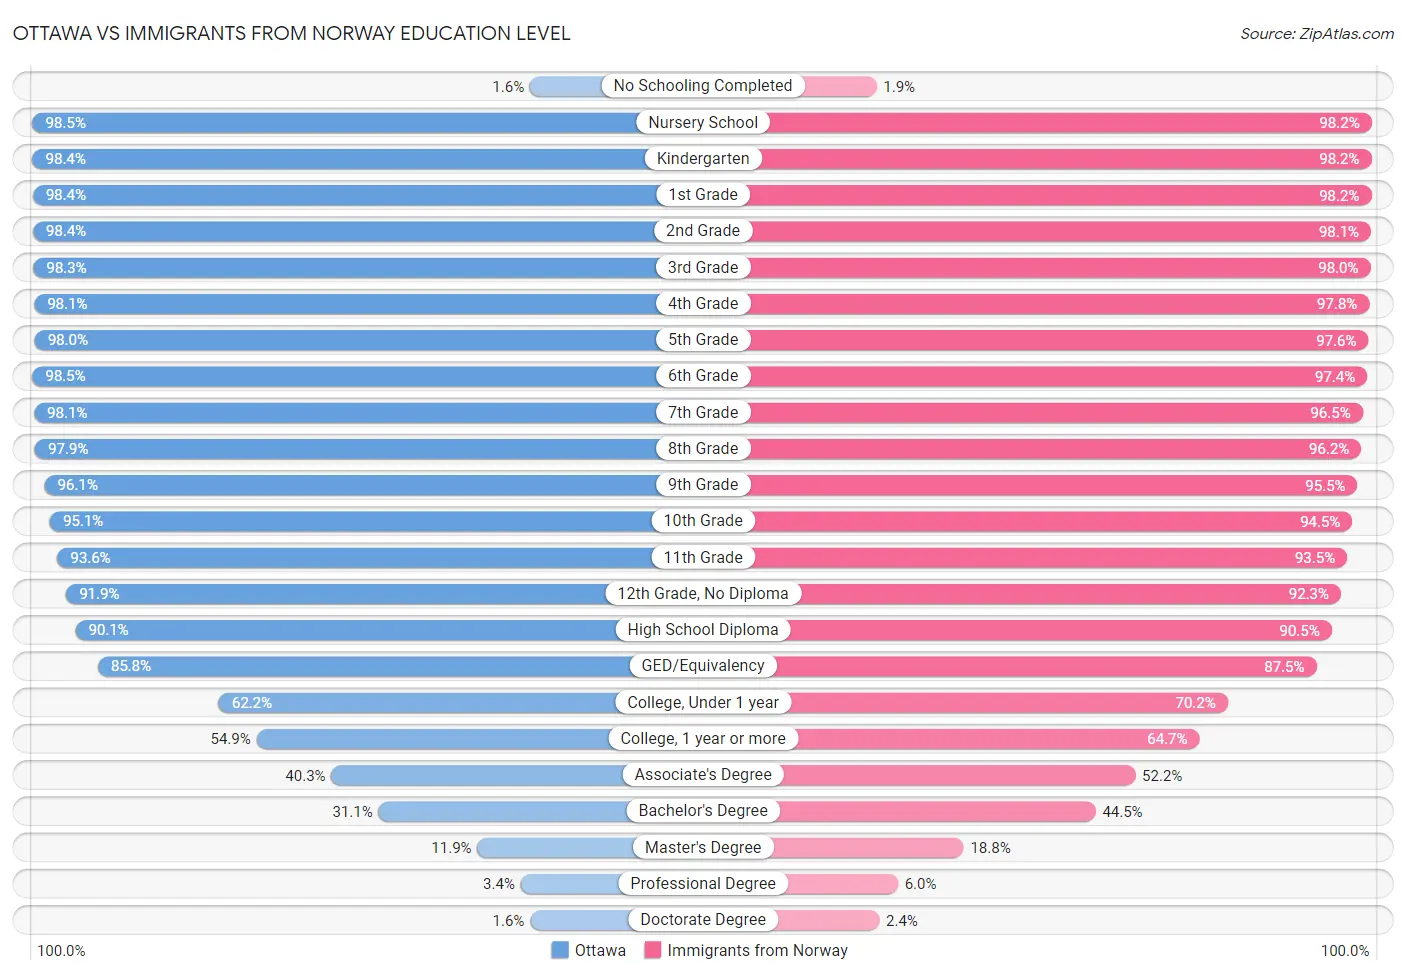 Ottawa vs Immigrants from Norway Education Level